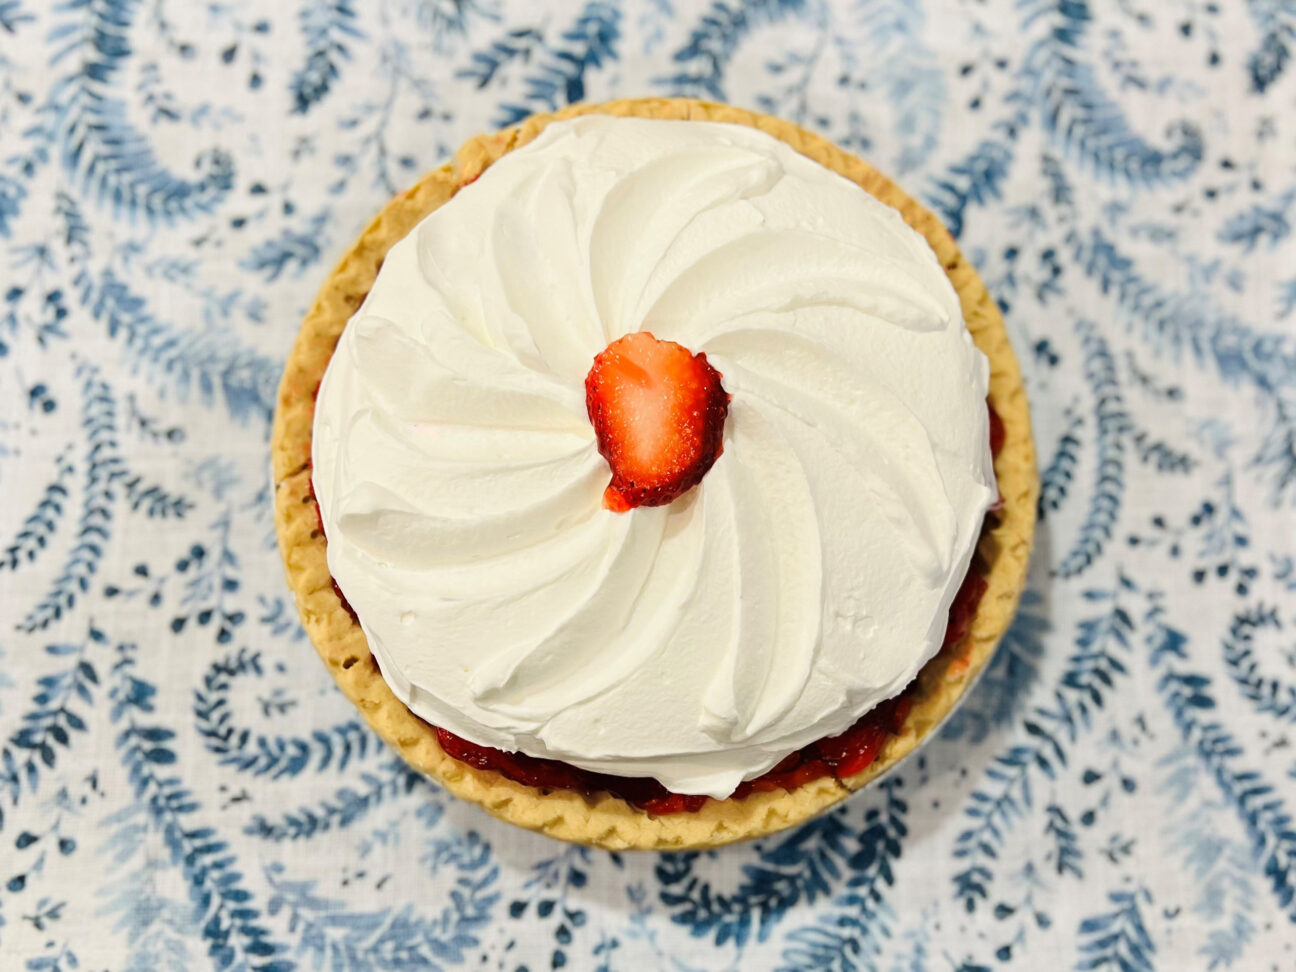 Strawberry pie on table